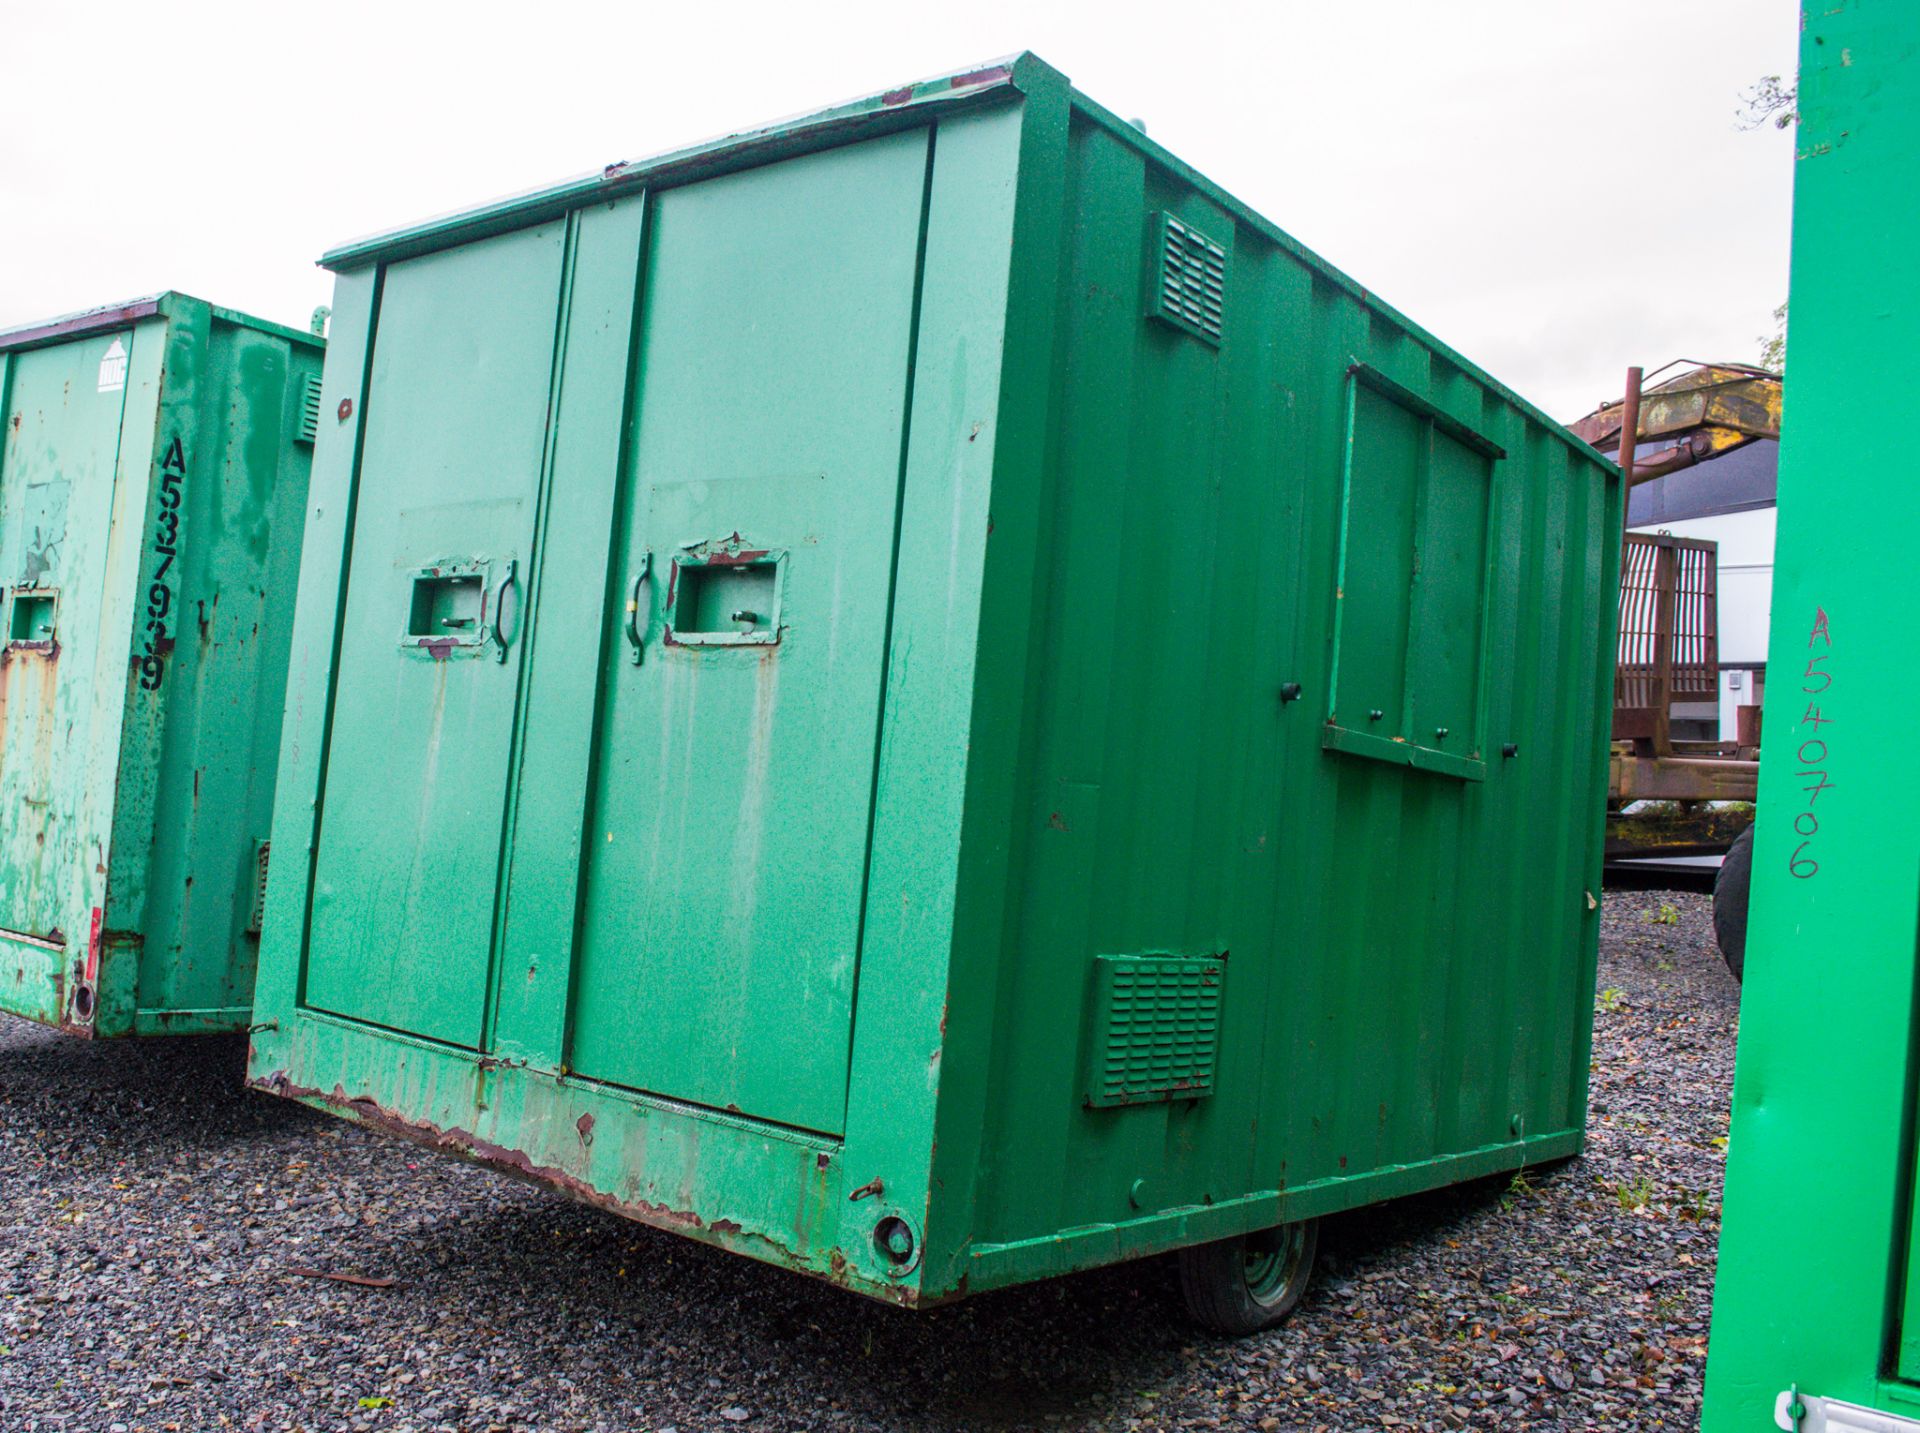 Ground Hog 12' by 8' fast tow self lowering welfare unit    c/w canteen area, toilet room, generator - Image 5 of 12